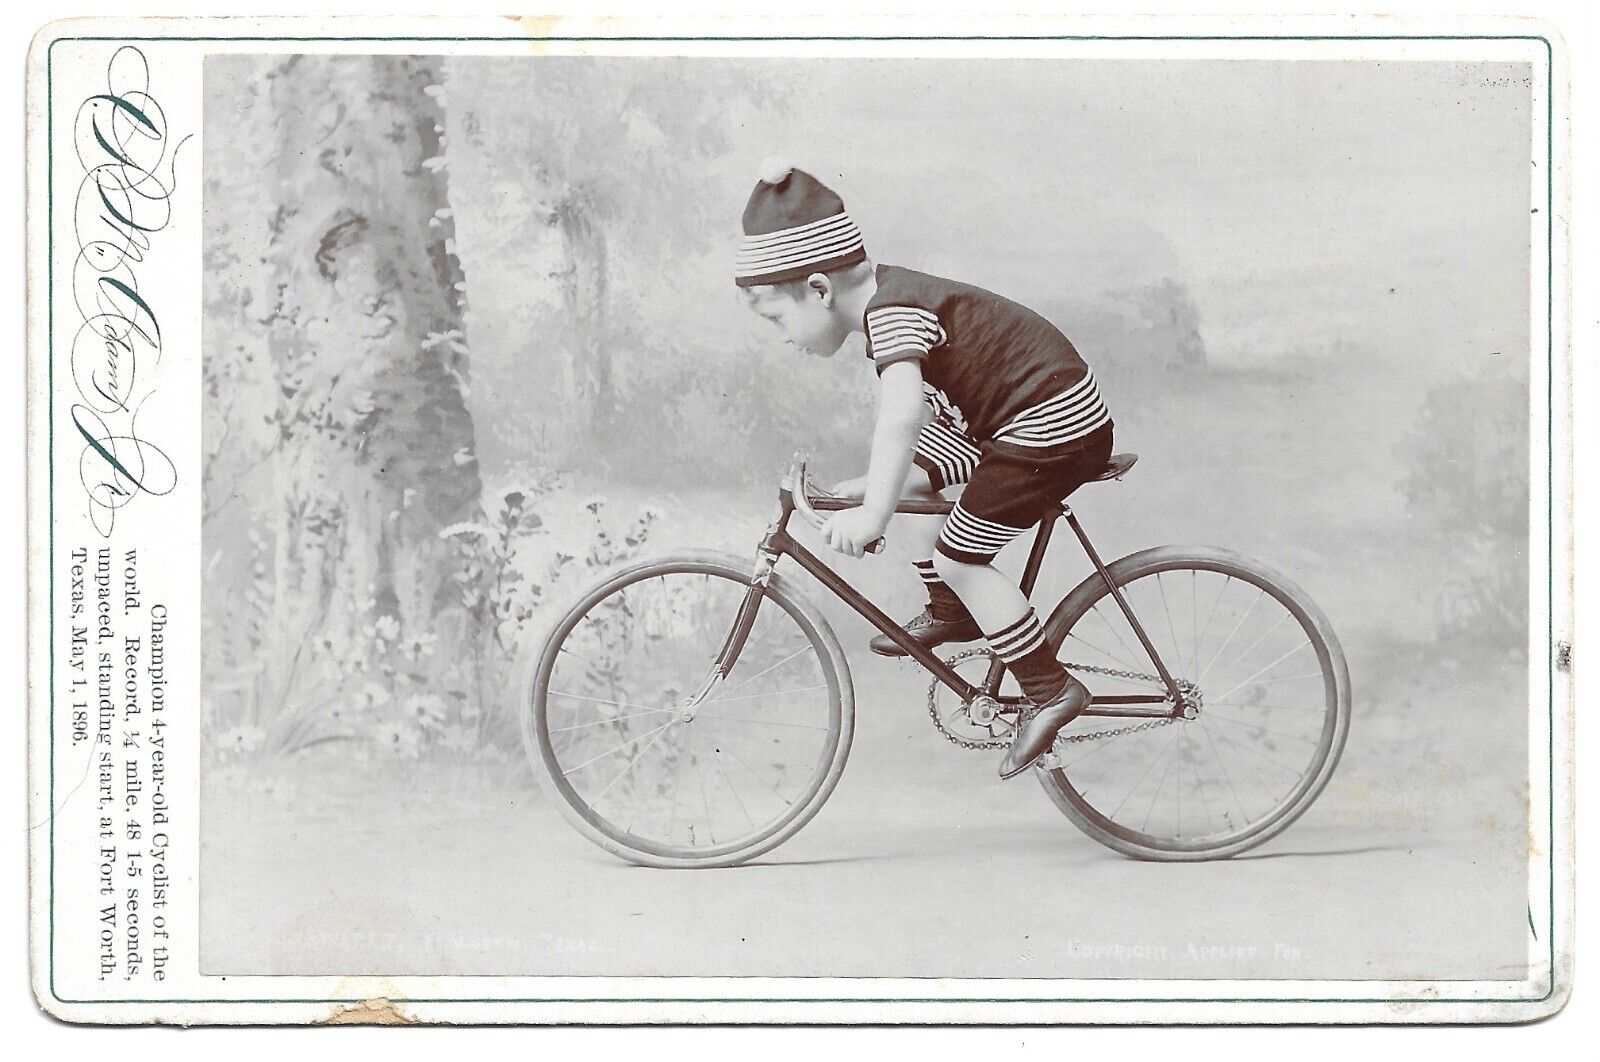 Fort Worth Texas Champion 4 Year Old Bicyclist Antique Cabinet Card Photo